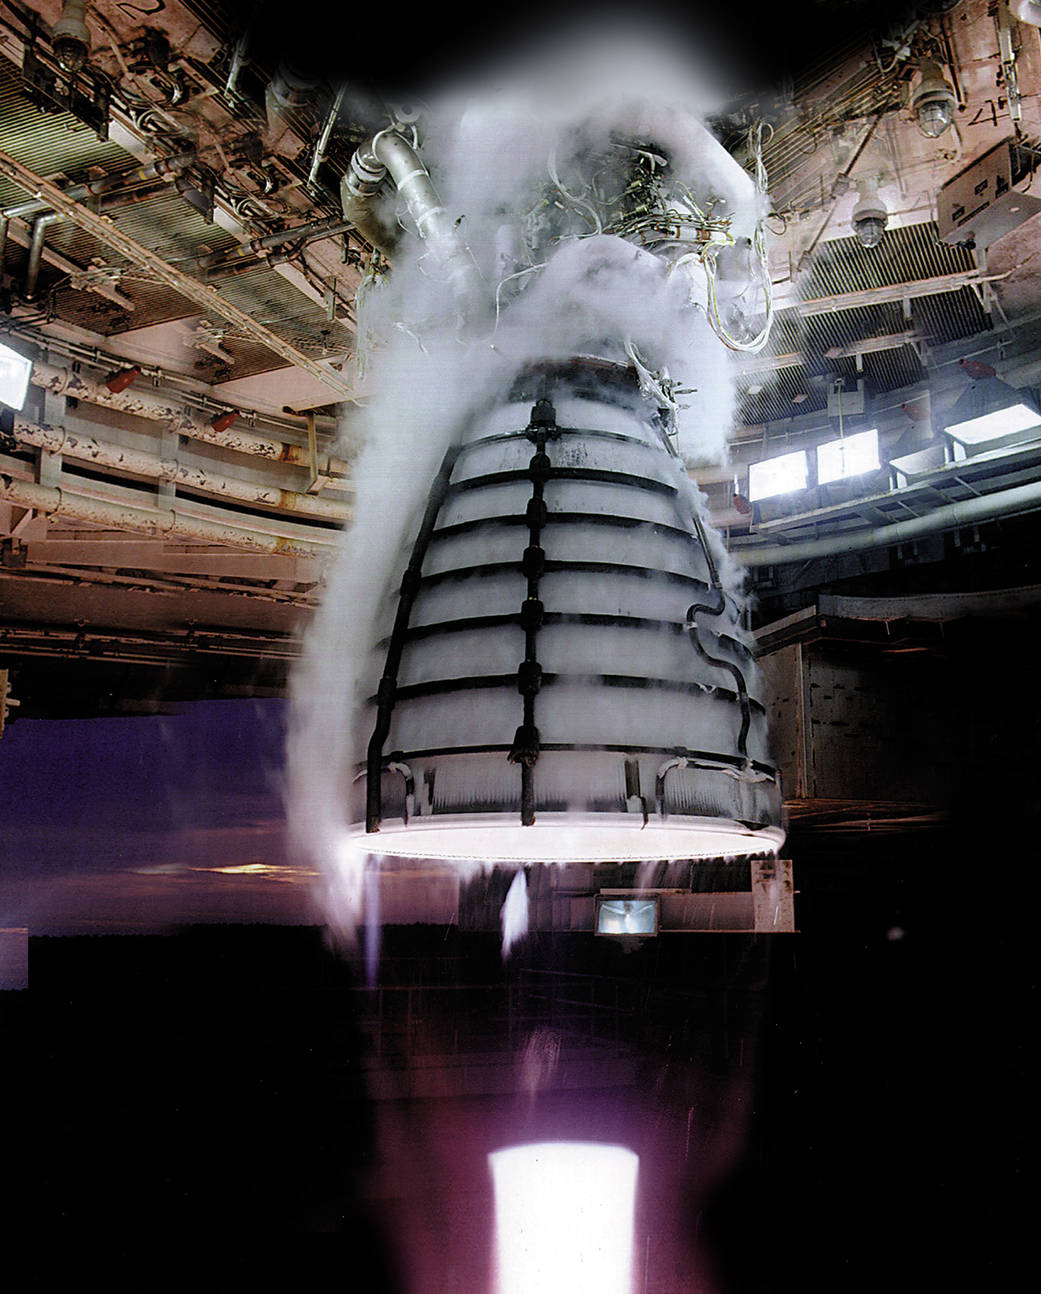 RS-25 Test Fire